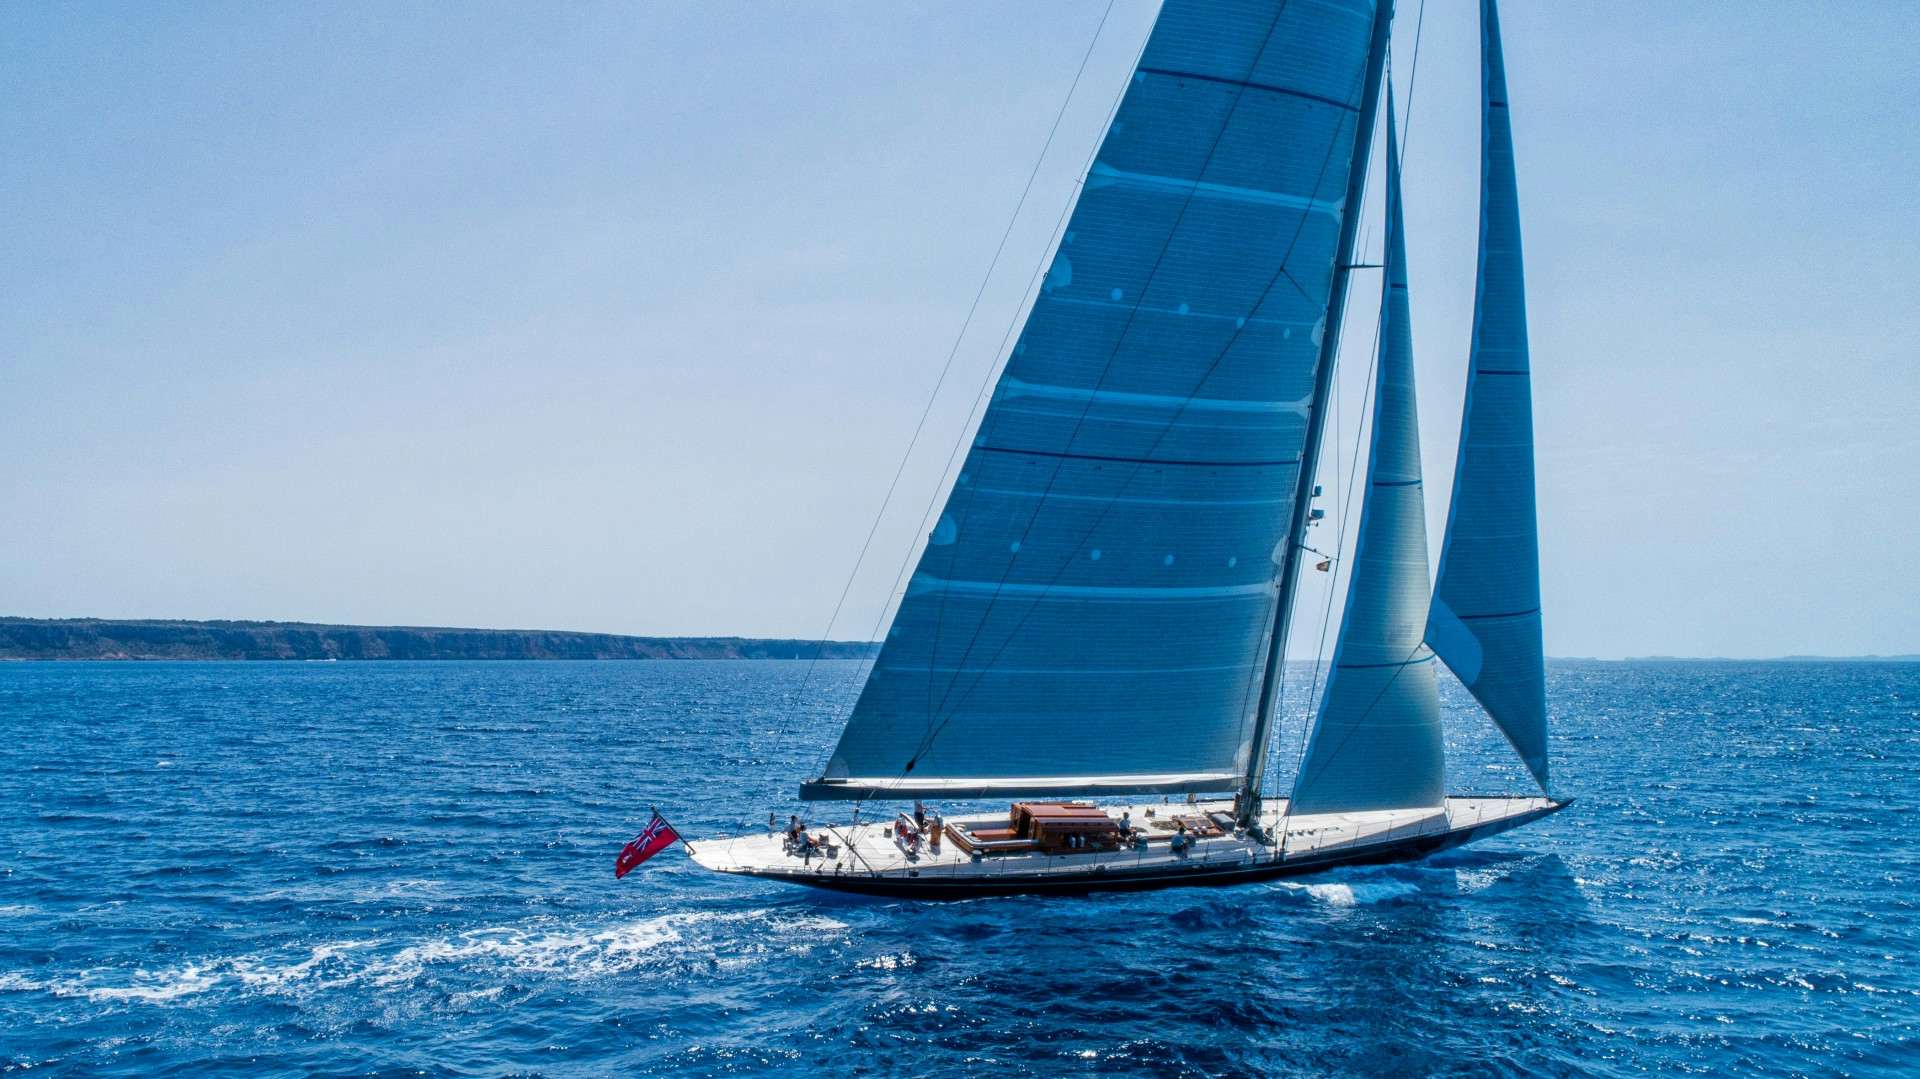 Side profile of RAINBOW sailing yacht on the water